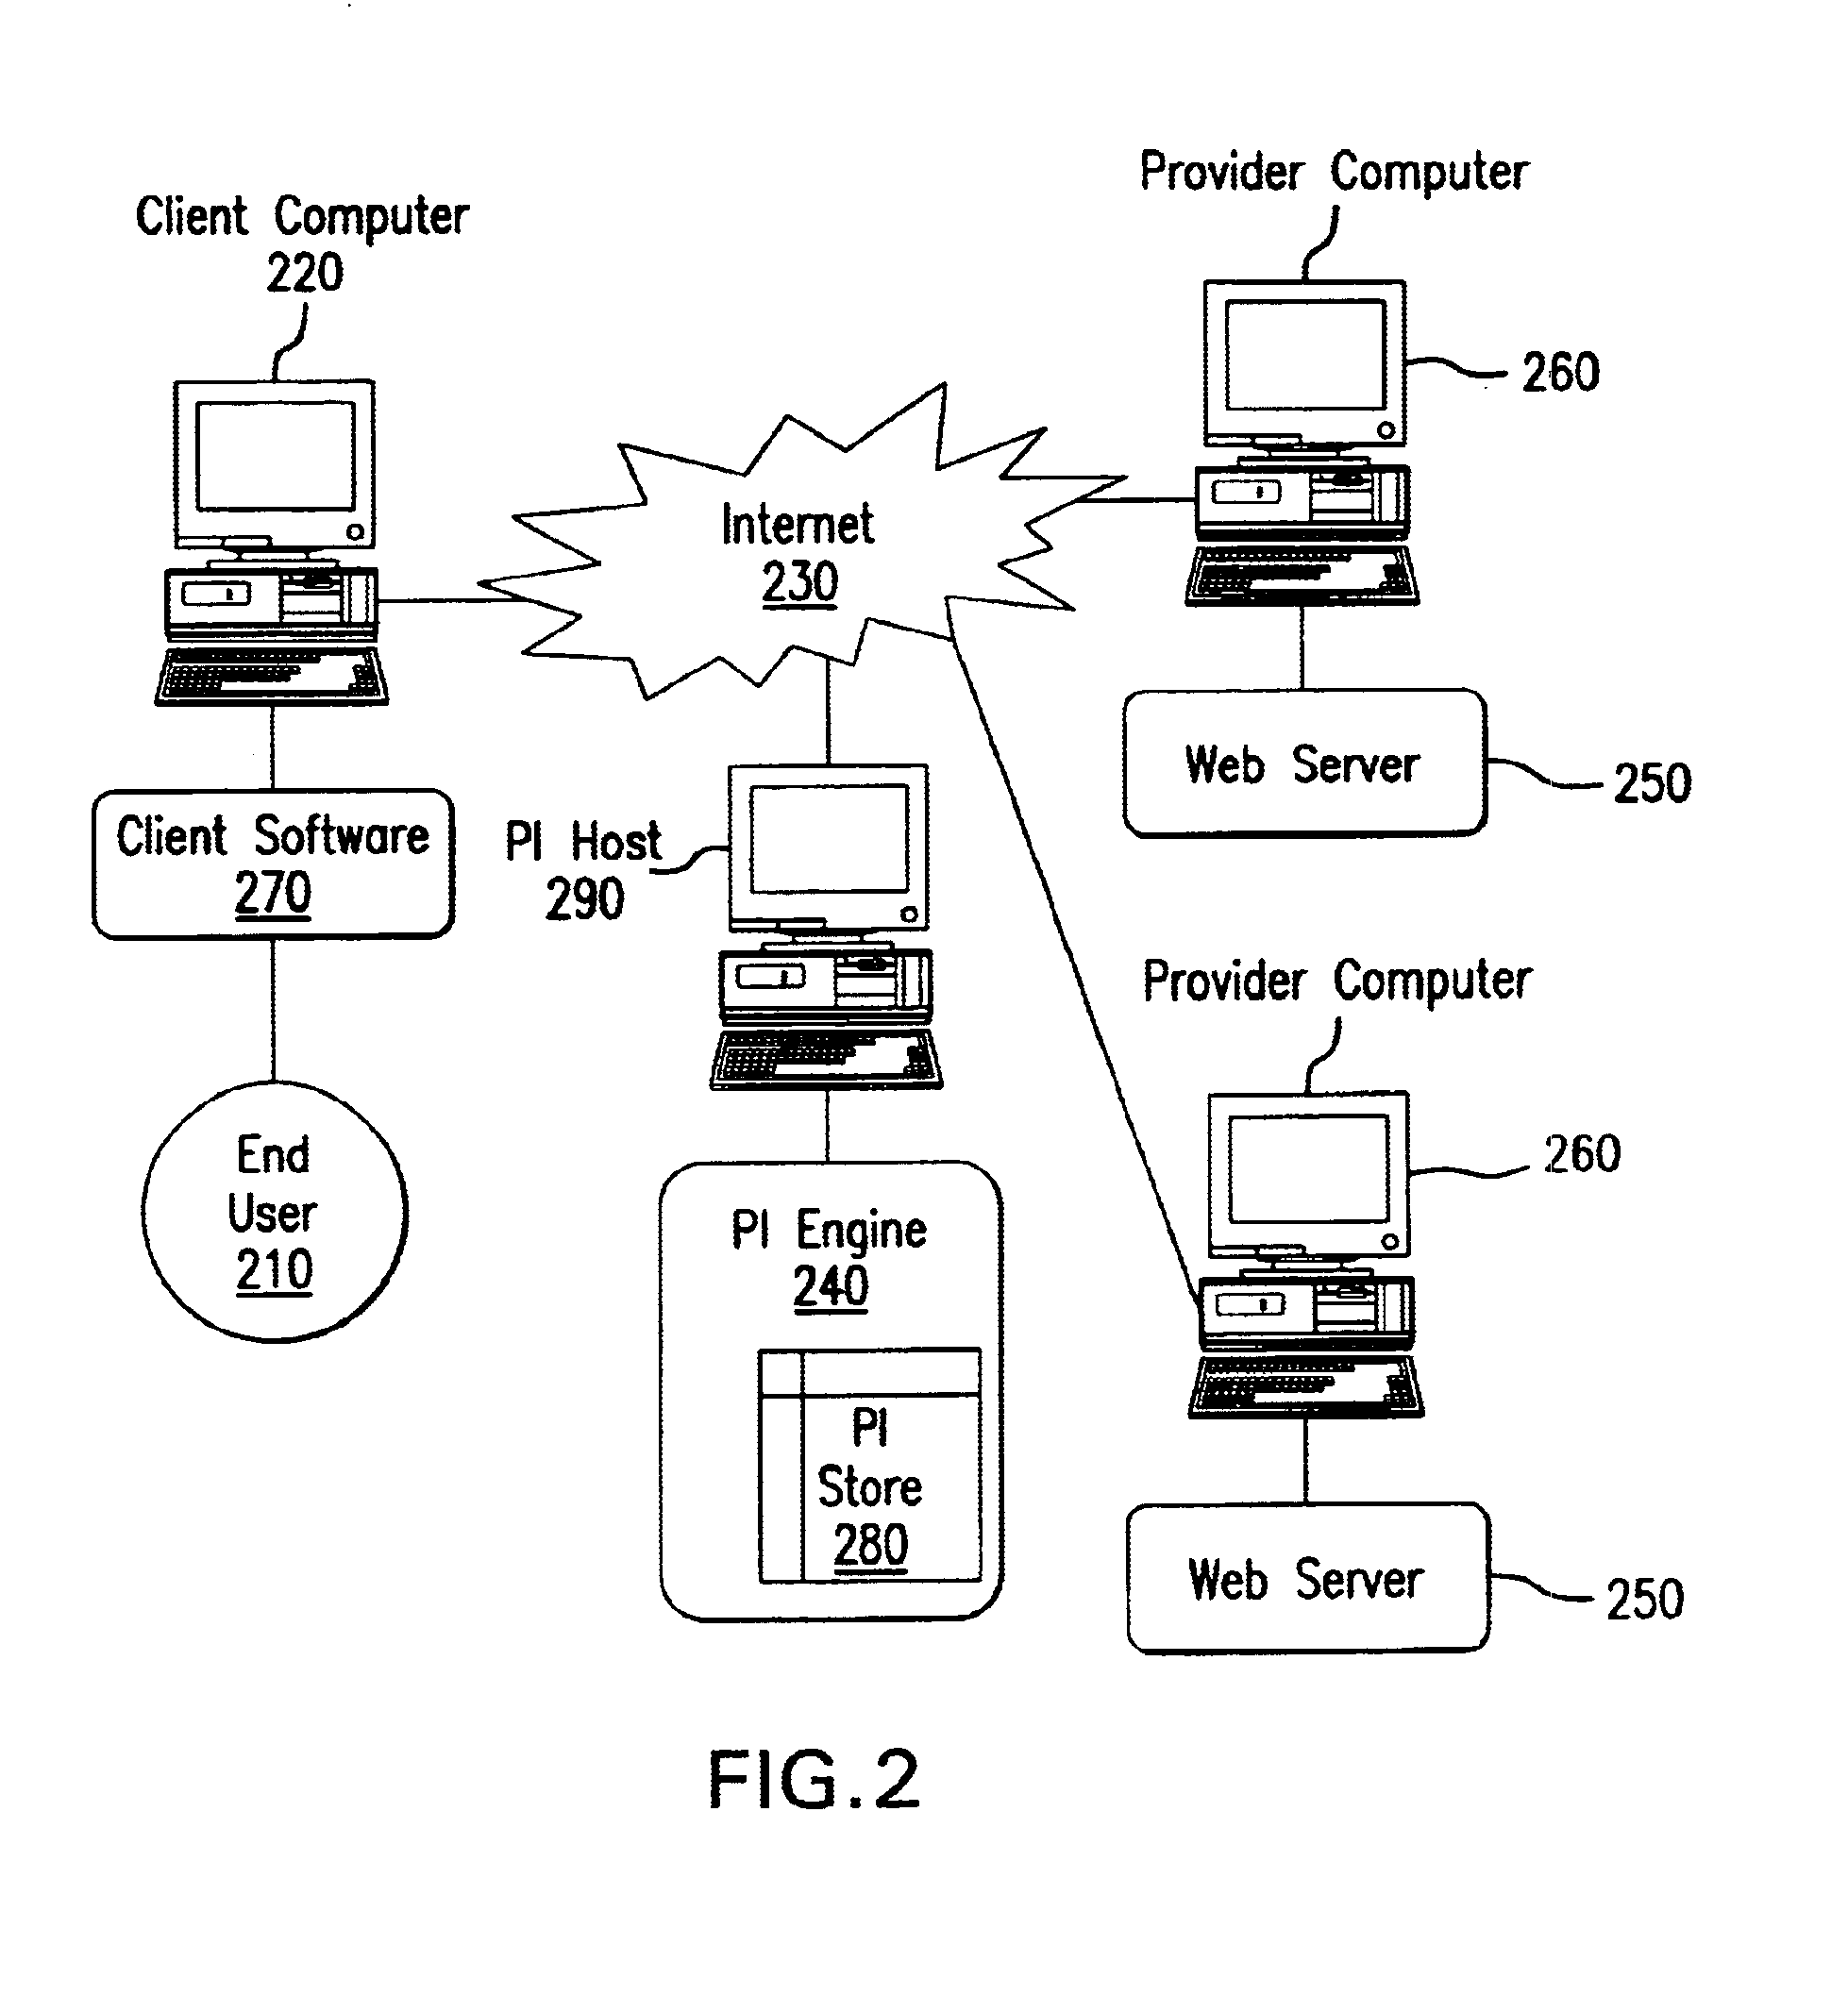 System and method for distributed storage and retrieval of personal information